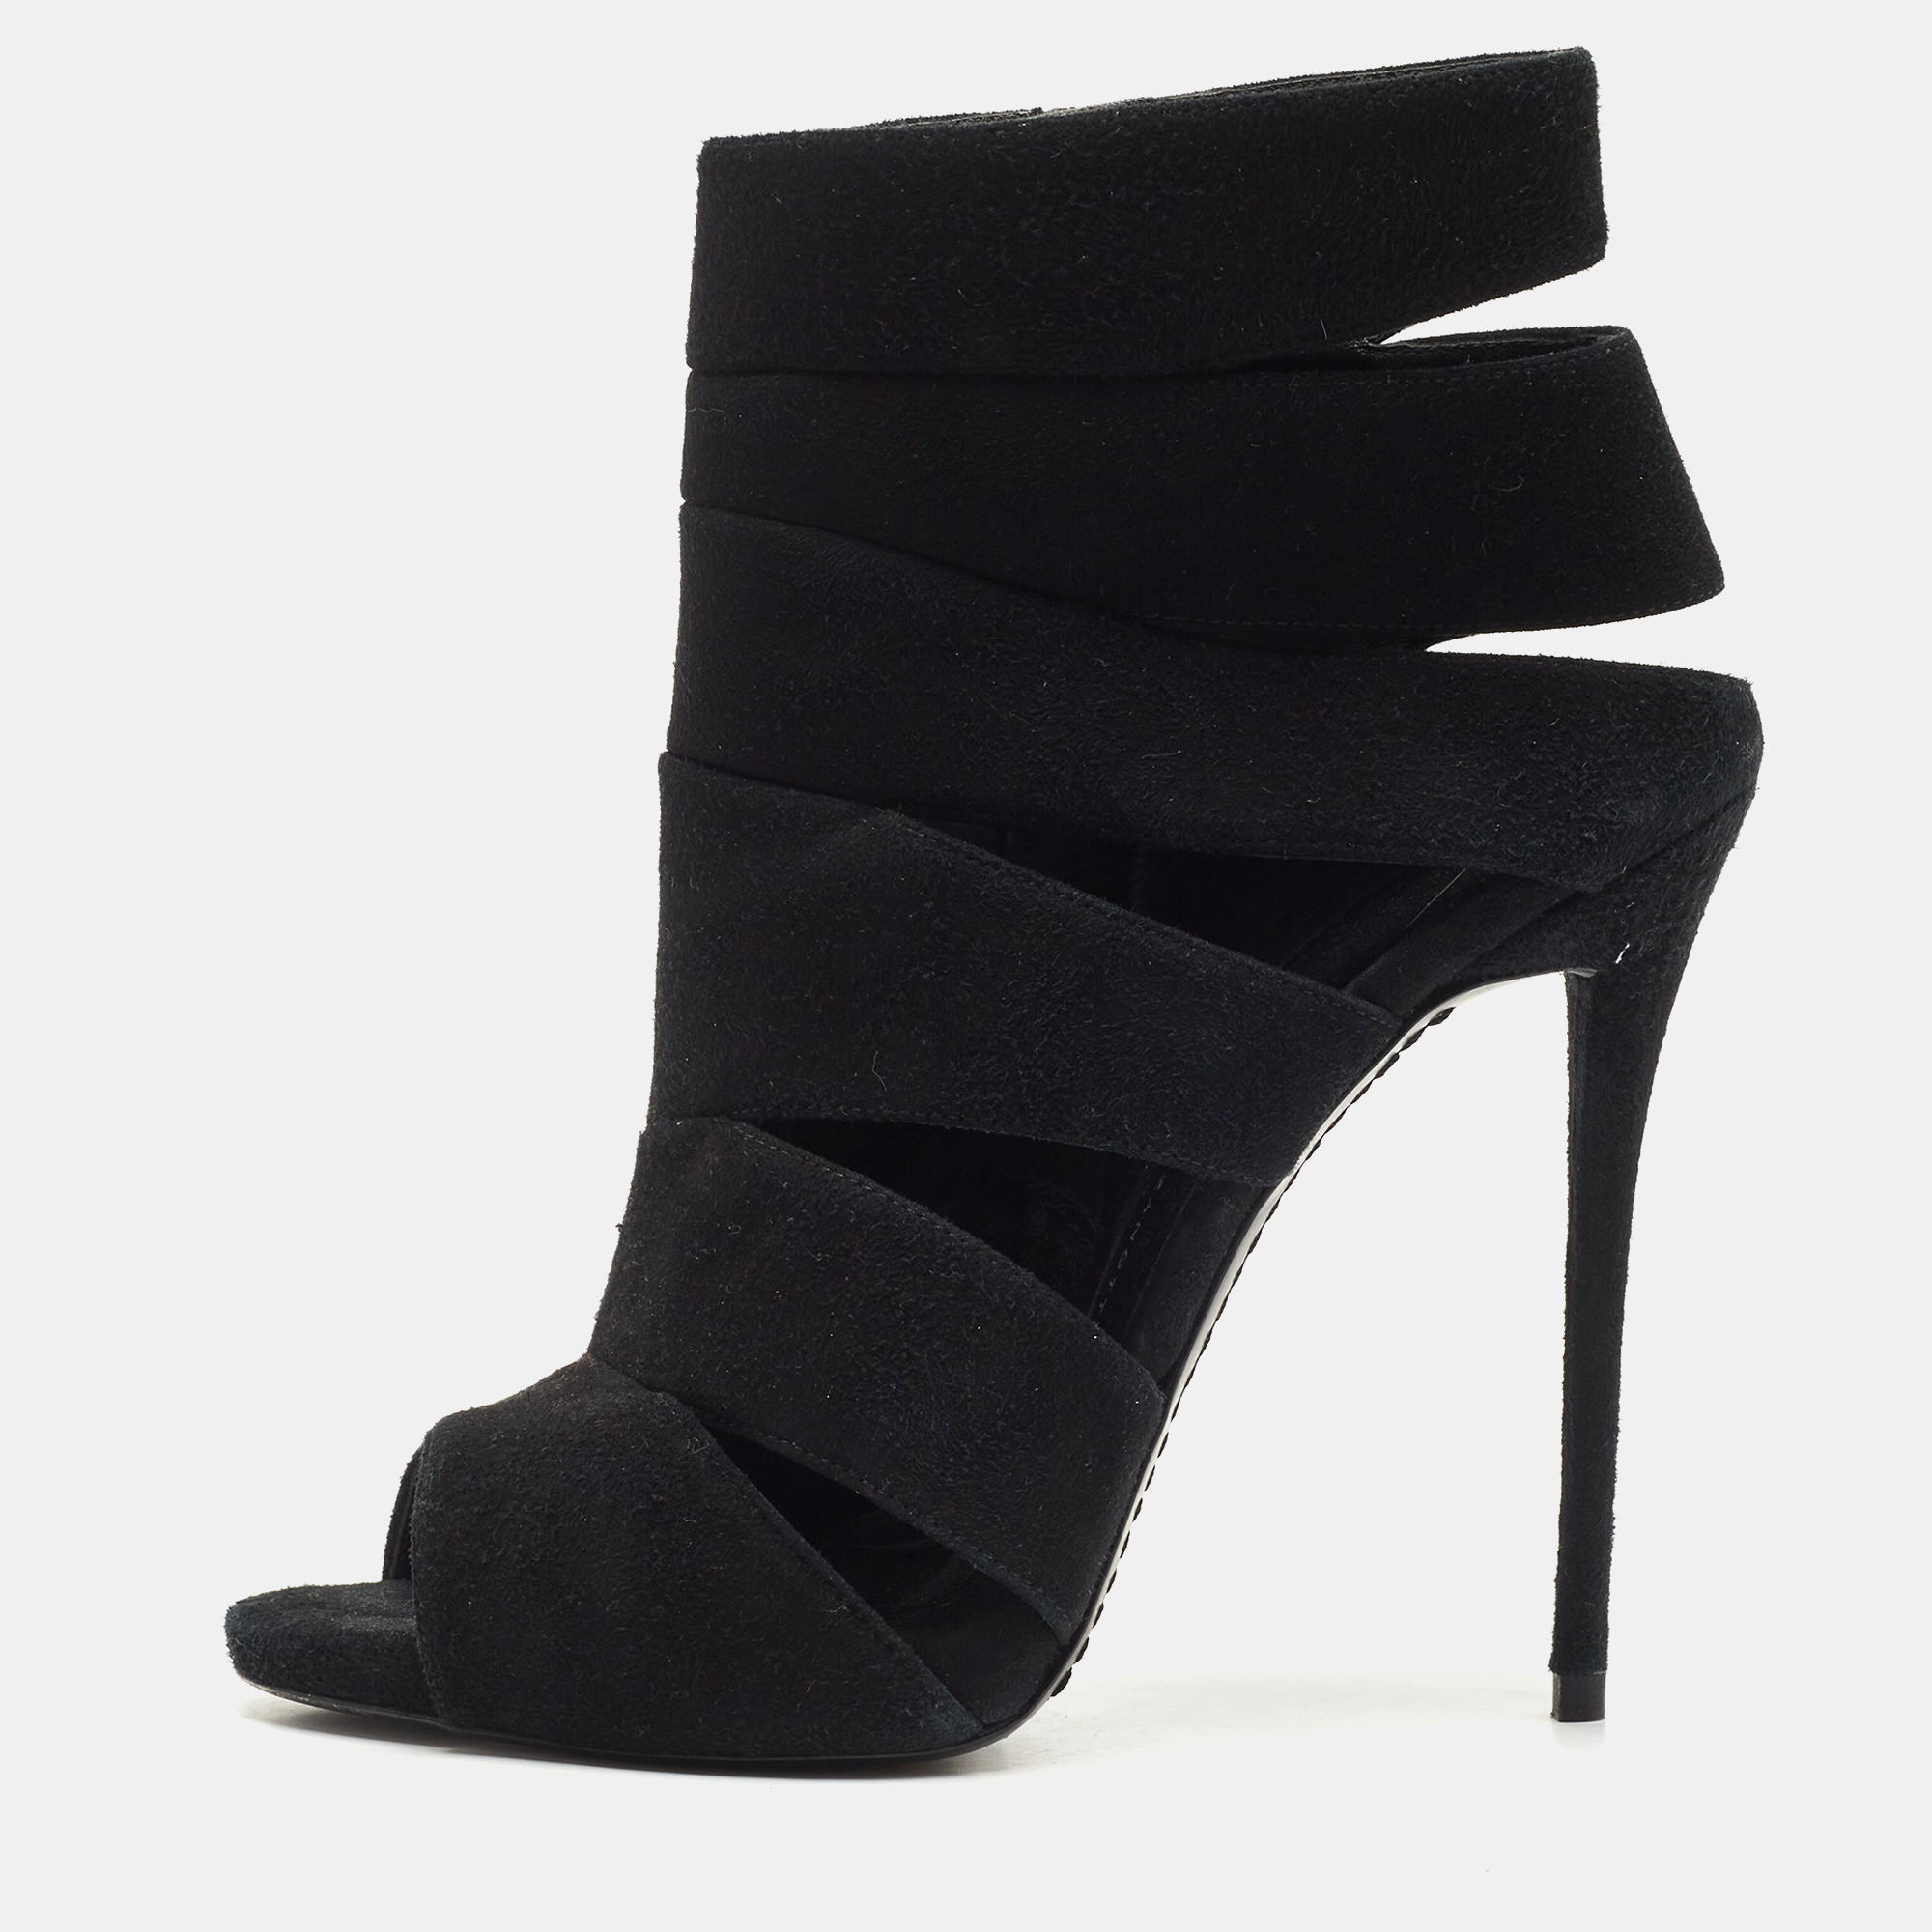 

Giuseppe Zanotti Black Suede Cut Out Peep Toe Ankle Booties Size